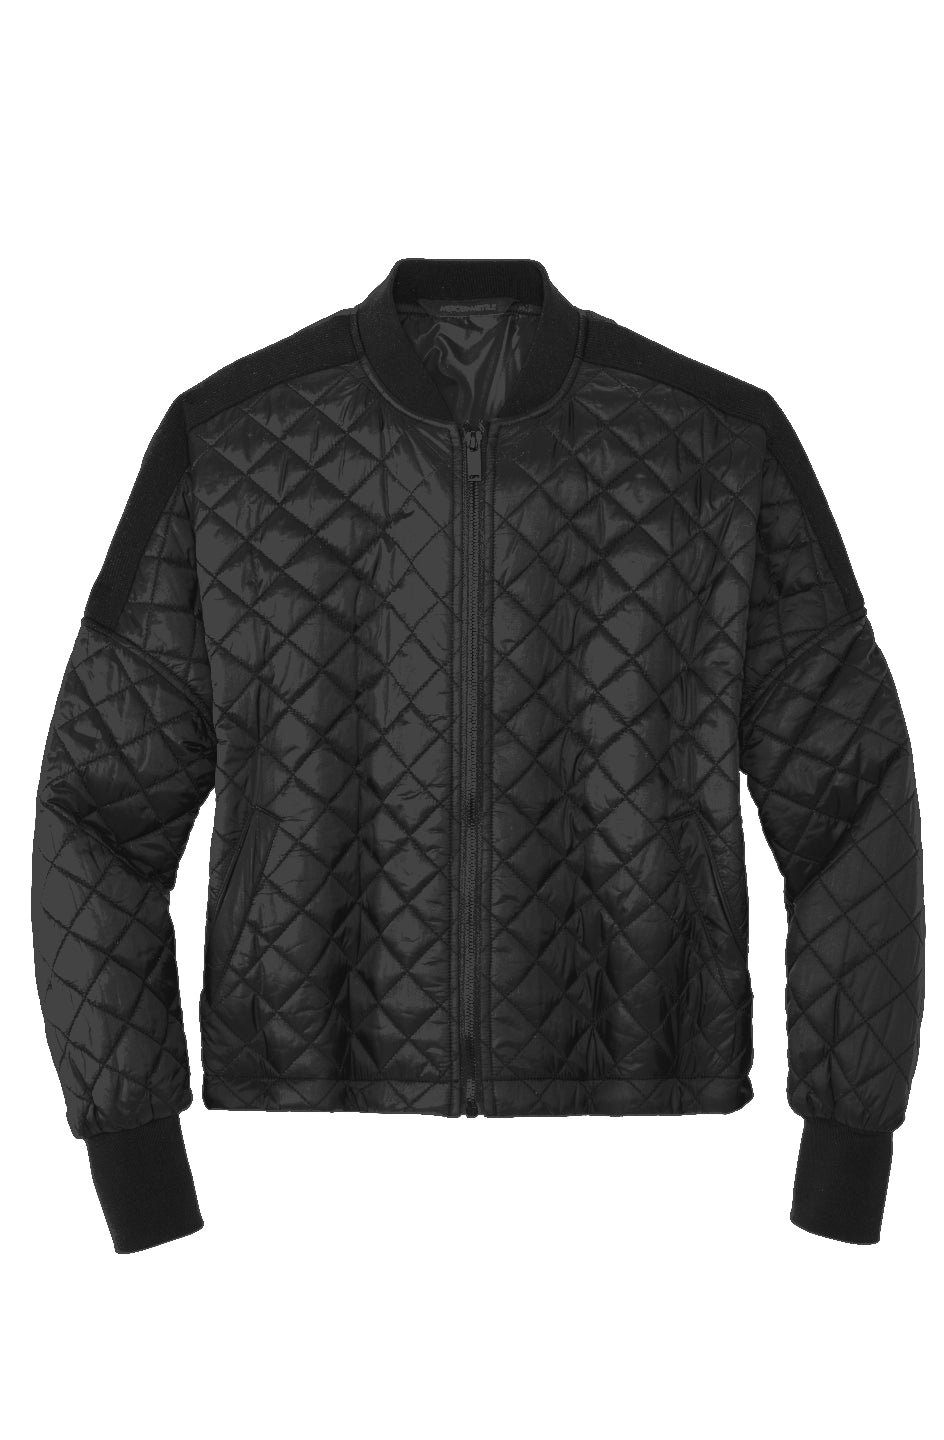 Dragon Foxx™ Women's Black Boxy Quilted Jacket - jackets - Apliiq - Dragon Foxx™ Womens Black Boxy Quilted Jacket - APQ-4487387S5A0 - xs - Deep Black - Black Boxy Quilted Jacket - Boxy Quilted Jacket - Dragon Foxx™